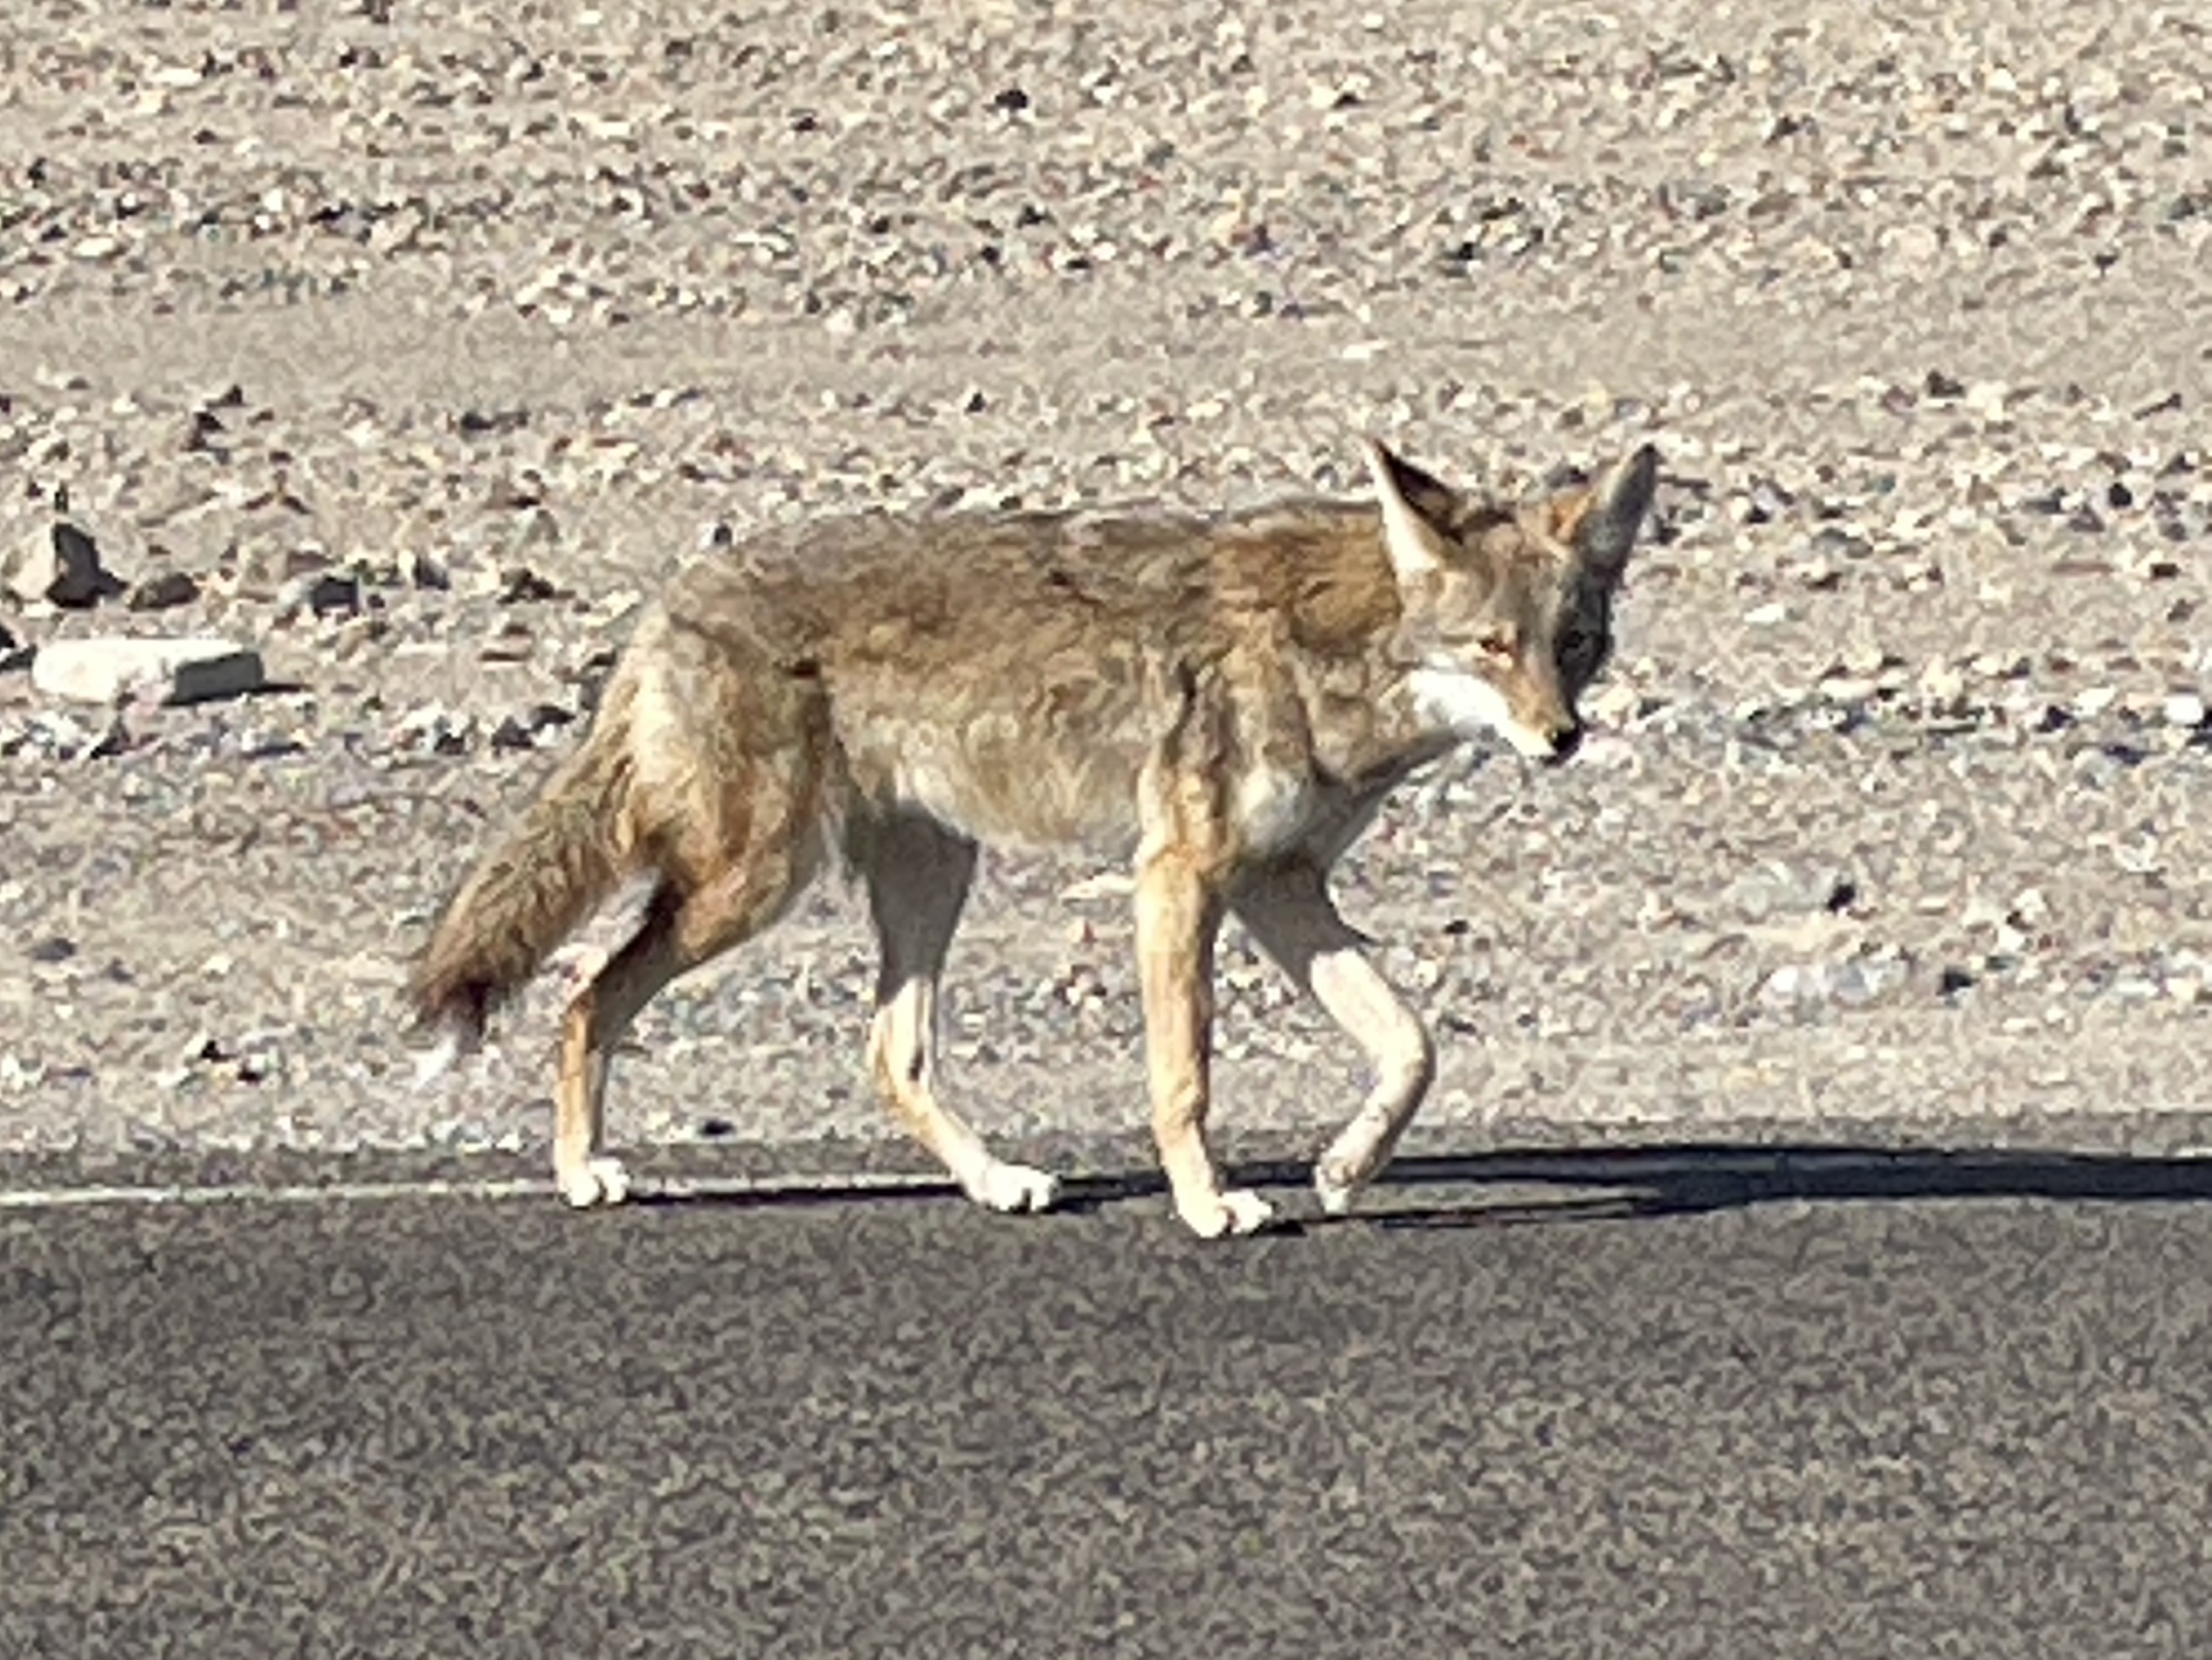 A coyote looks at the camera while walking on an asphalt road.